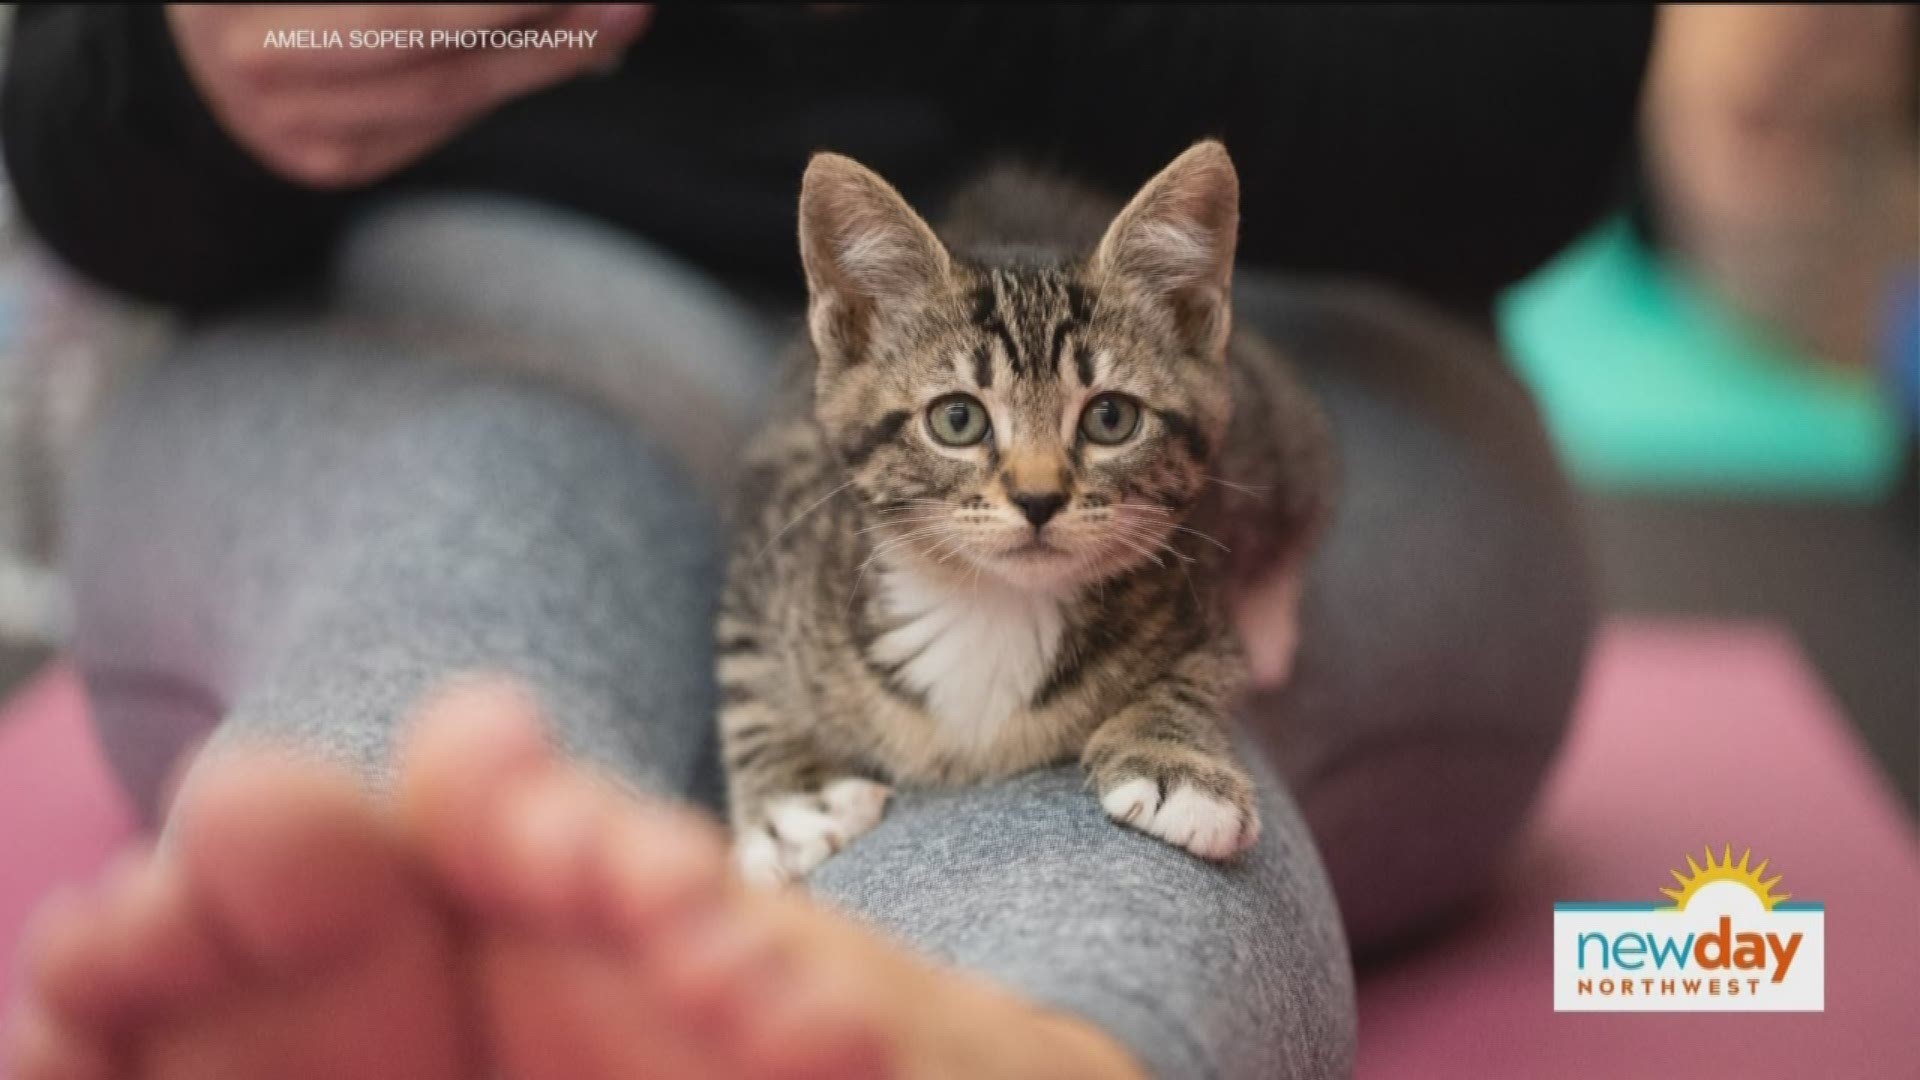 If you're an animal lover who is also looking for a new take on yoga, Homeward Pet Adoption Center in Woodinville may have just what you need.